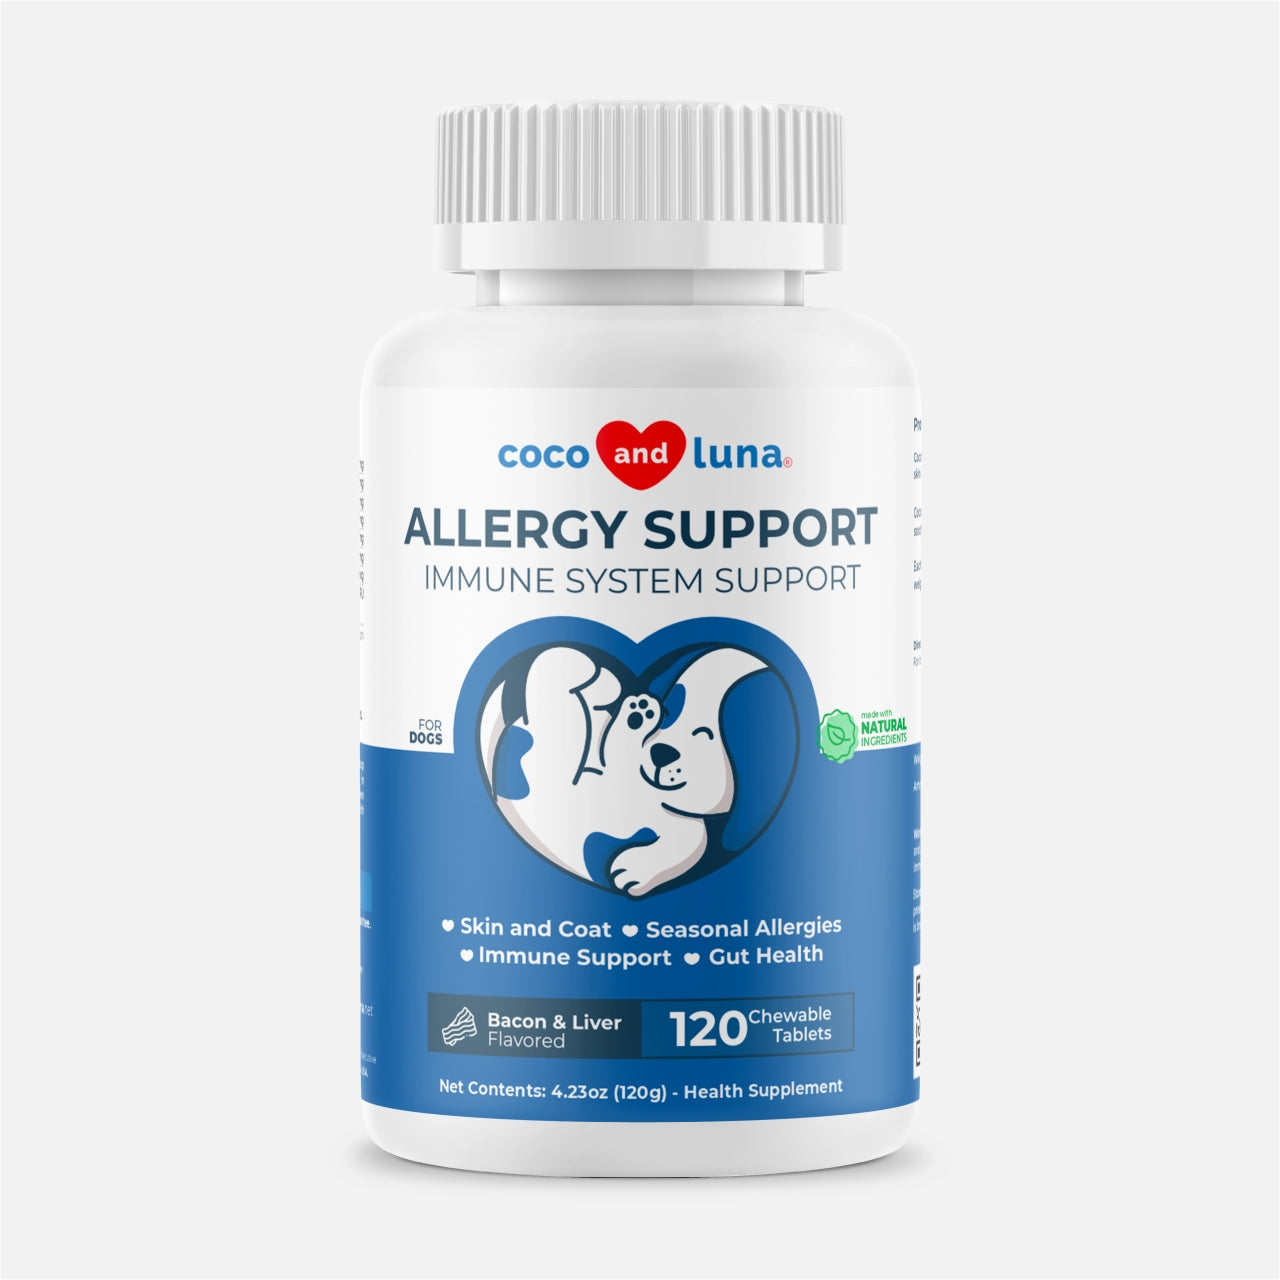 Allergy Support for Dogs - 120 Chewable Tablets - Coco and Luna